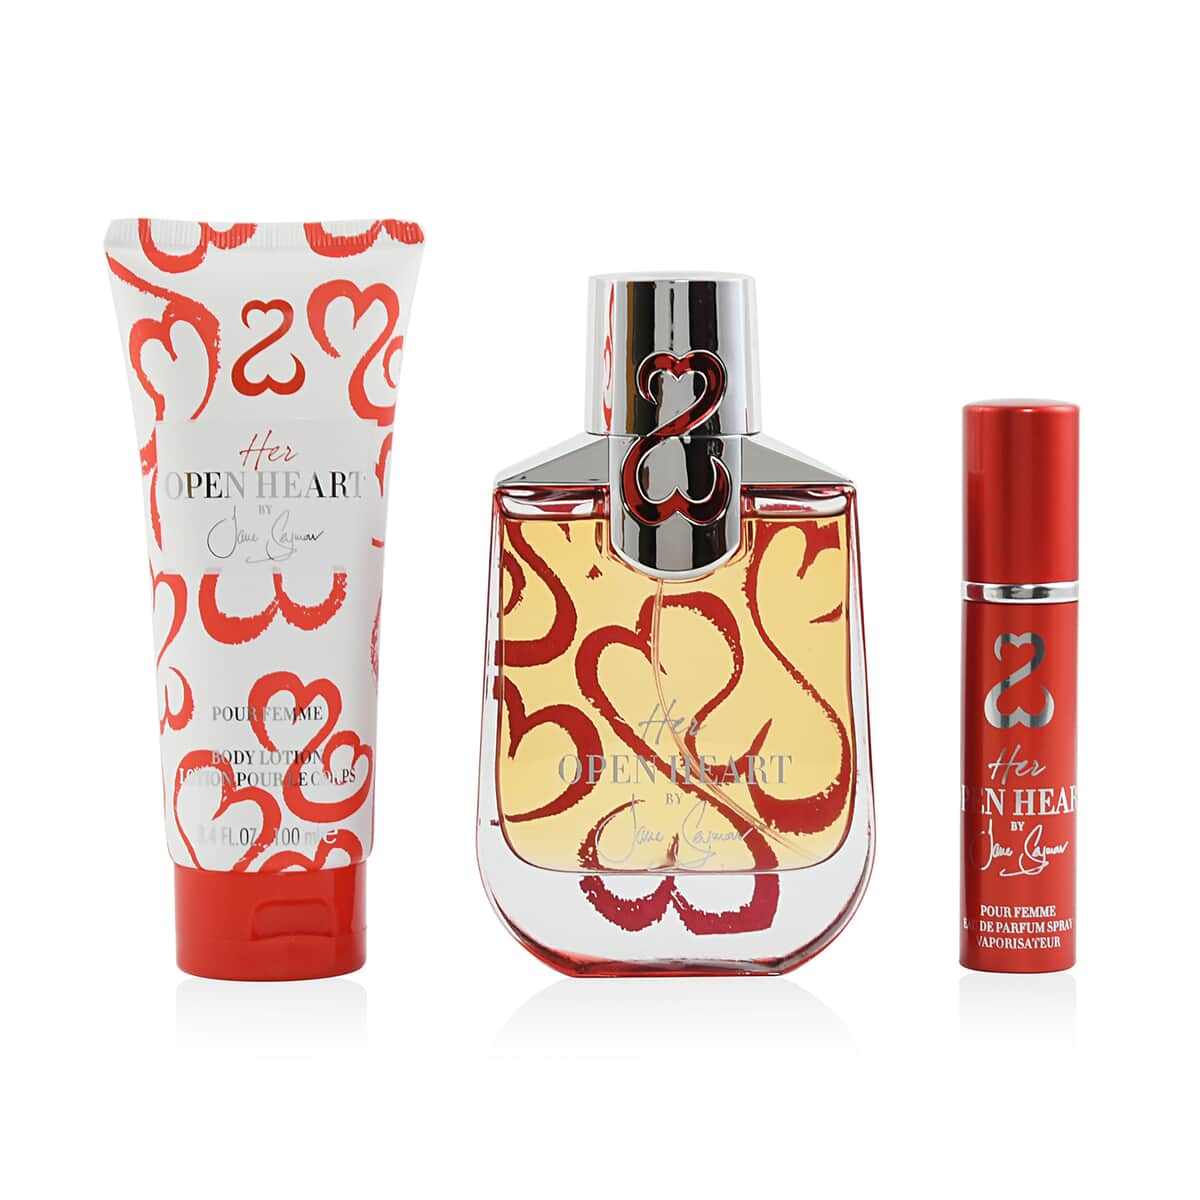 Her Open Heart by Jane Seymour for Women 3 Piece Set - Set Contains: 3.4 oz. Perfume Spray, 3.4 oz. Shower Gel, 5 oz. Purse Spray image number 0